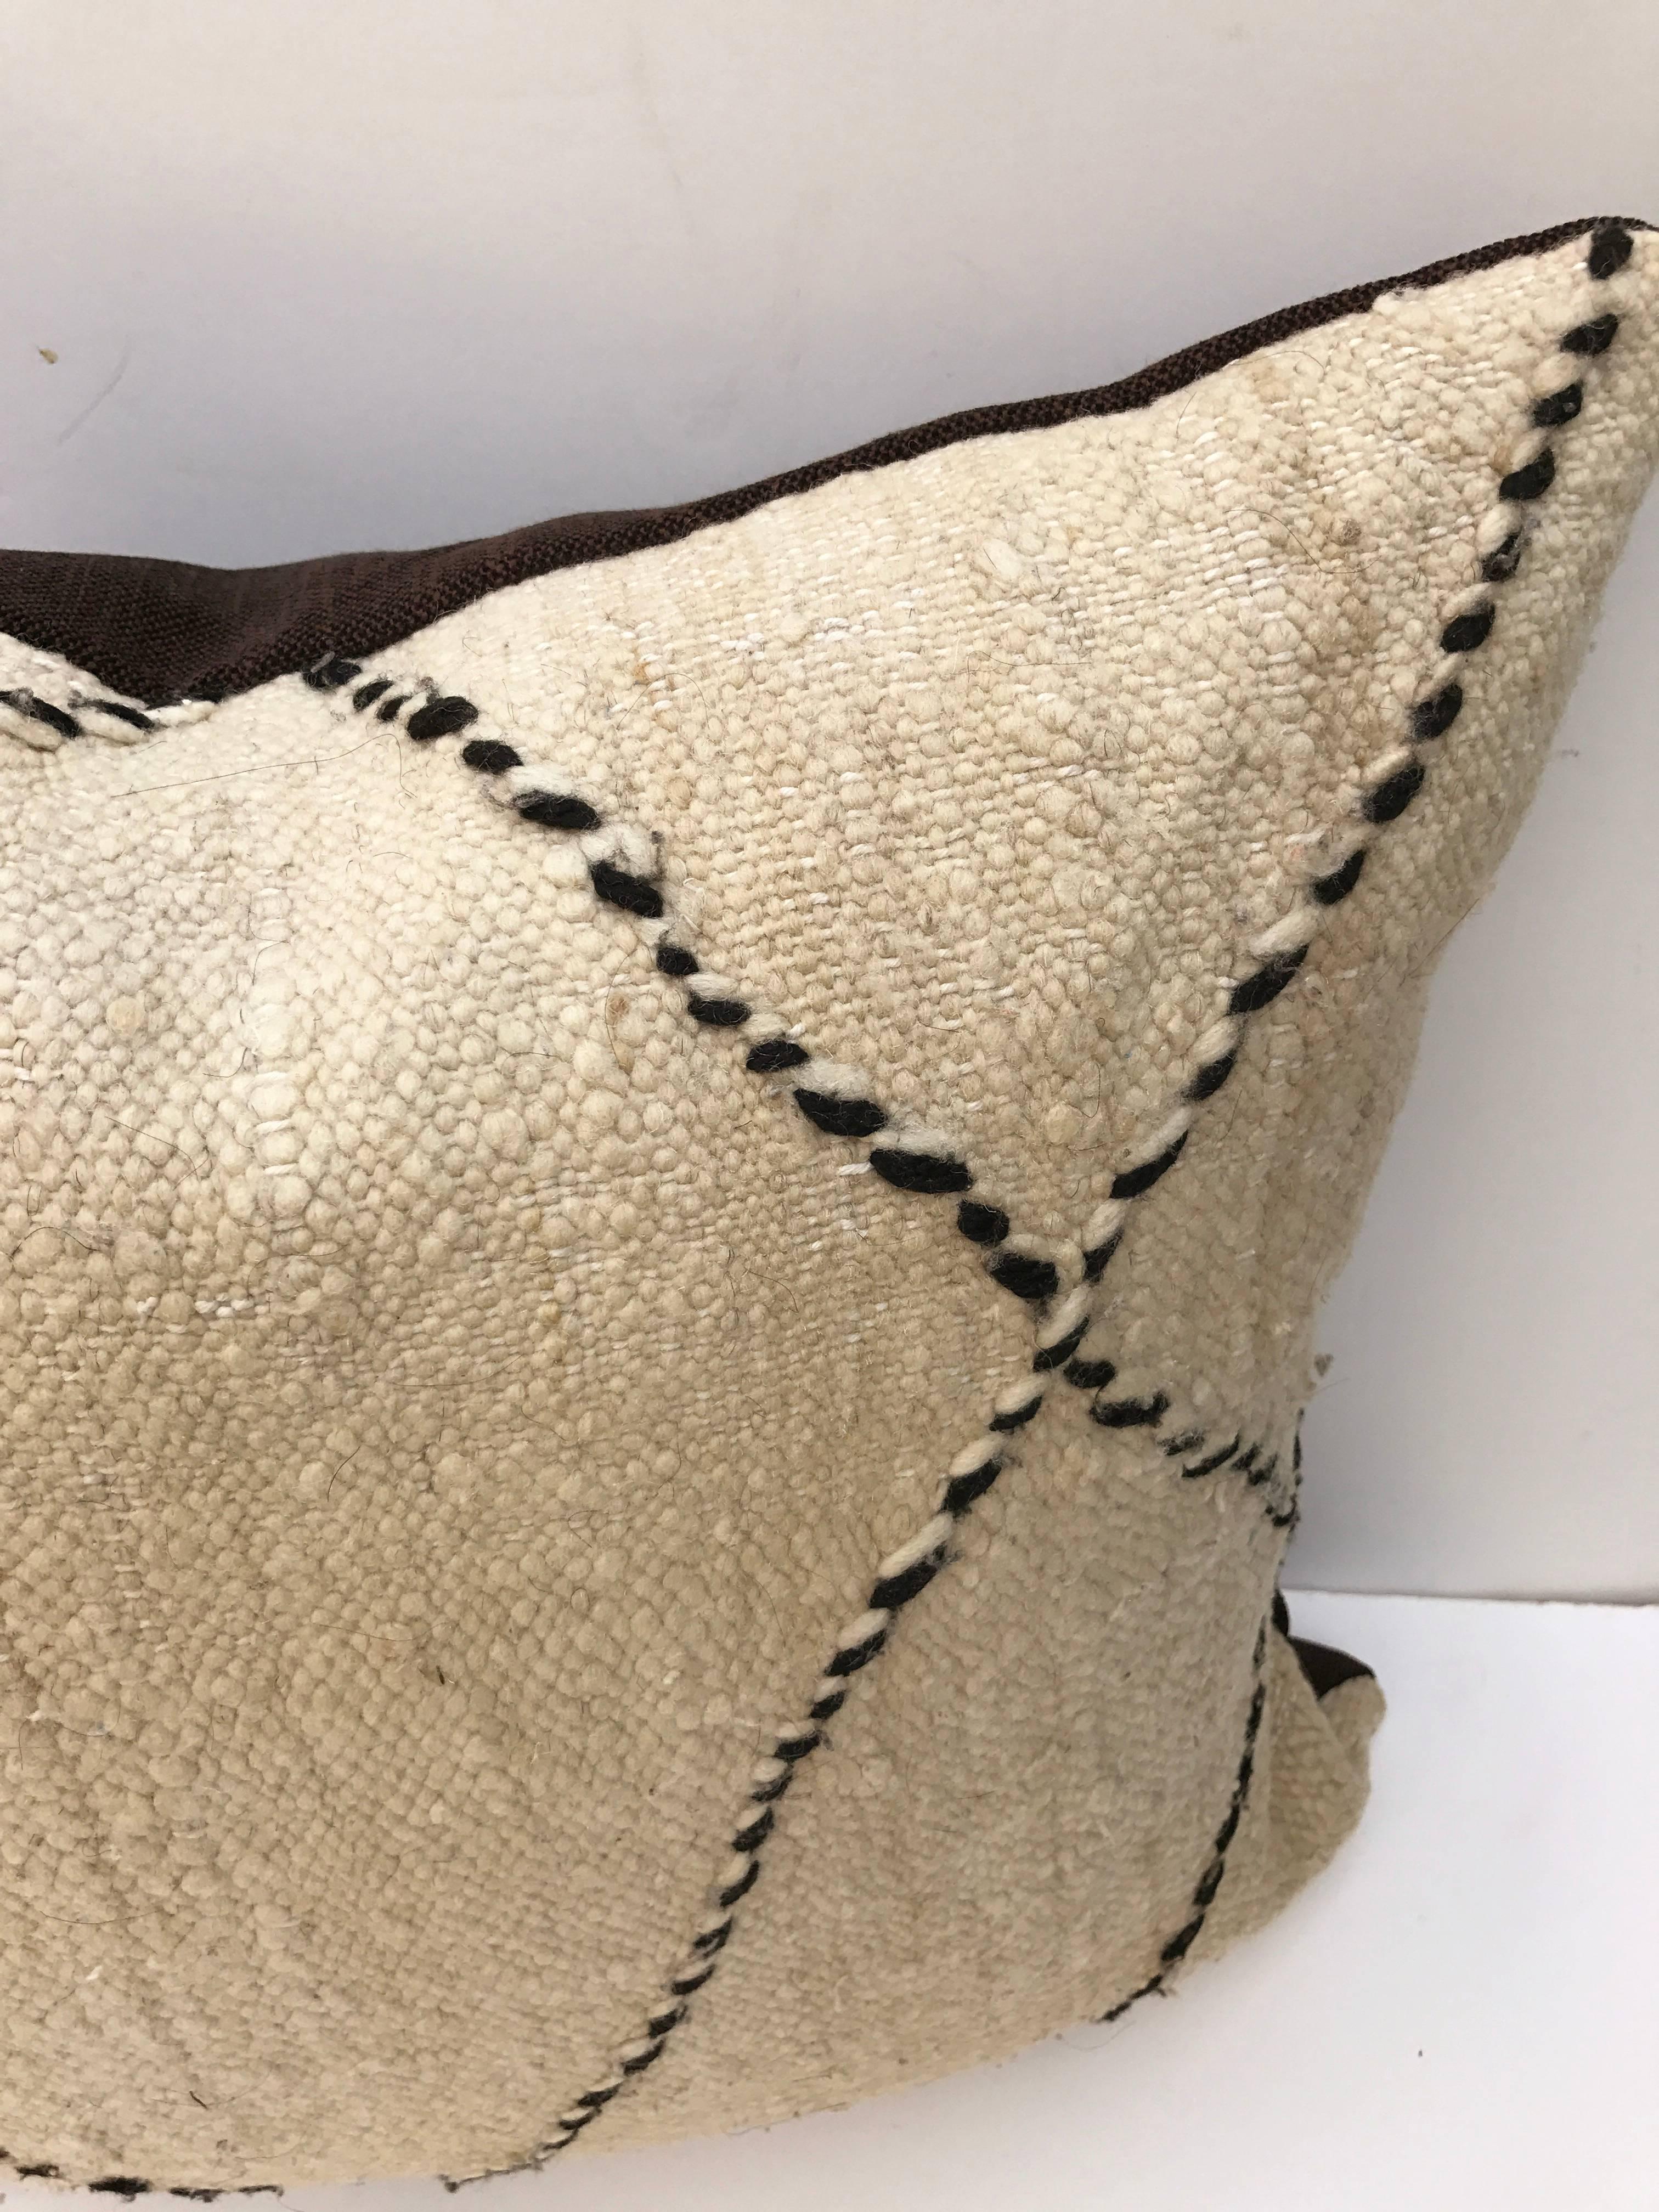 Custom pillow cut from a vintage hand loomed wool Moroccan Berber rug from the Atlas Mountains. Flat-weave with a woven tribal criss cross design from dark brown wool. Pillow is backed in a dark brown linen blend, filled with an insert of 50/50 down